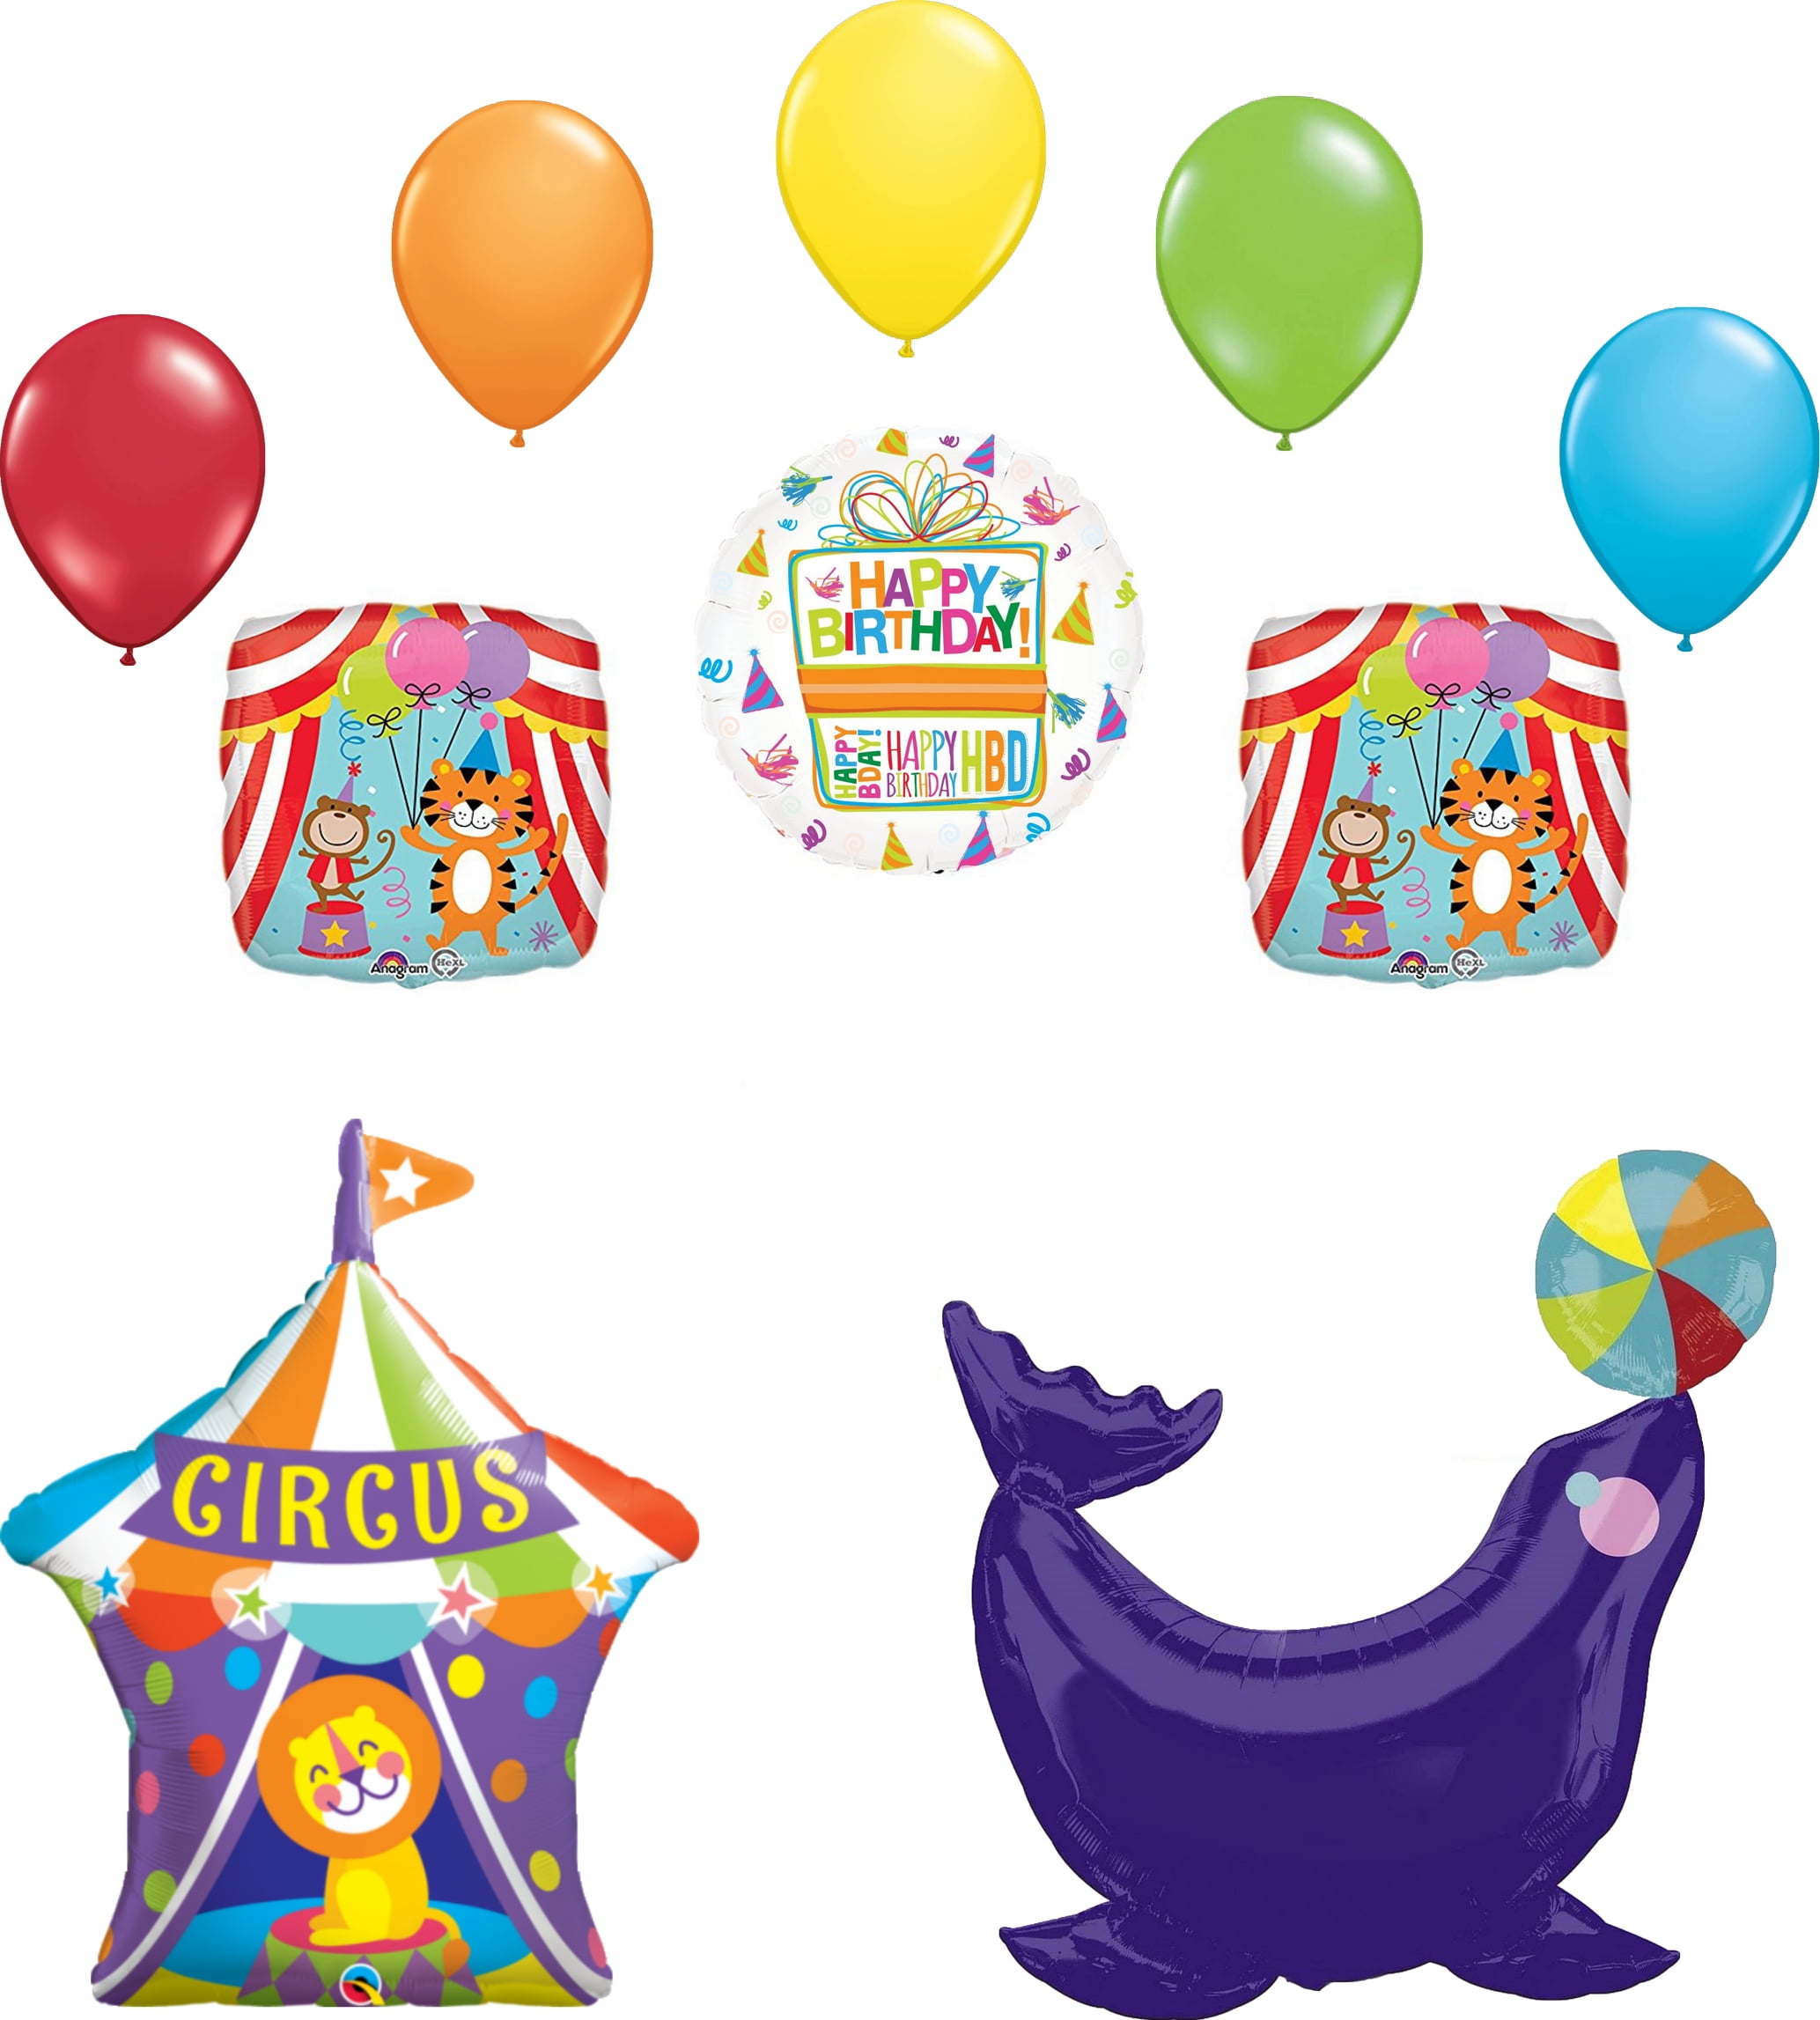 Party Stickers Bobo Clear Helium Balloon Stickers Happy Birthday Decoration  Stickers Anniversary Party Events Holiday Decoration - AliExpress